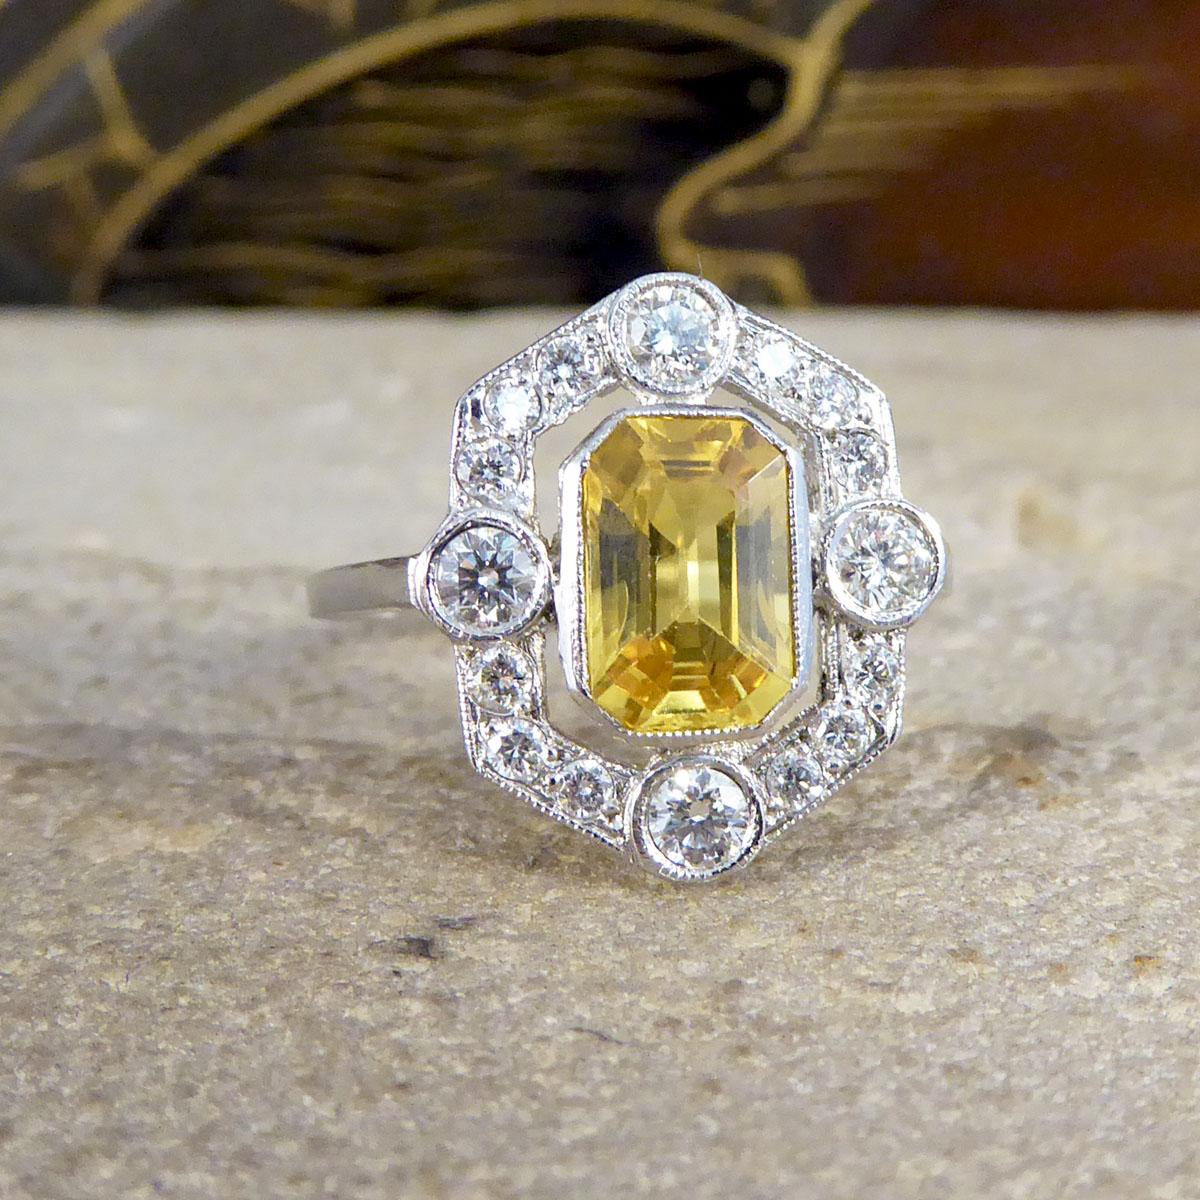 This stunning Contemporary ring has been made to resemble an Art Deco style ring with its geometric halo and setting. It features a single central Octogon Cut Yellow Sapphire stone weighing 1.25ct, surrounded by 16 Brilliant cut Diamonds with a